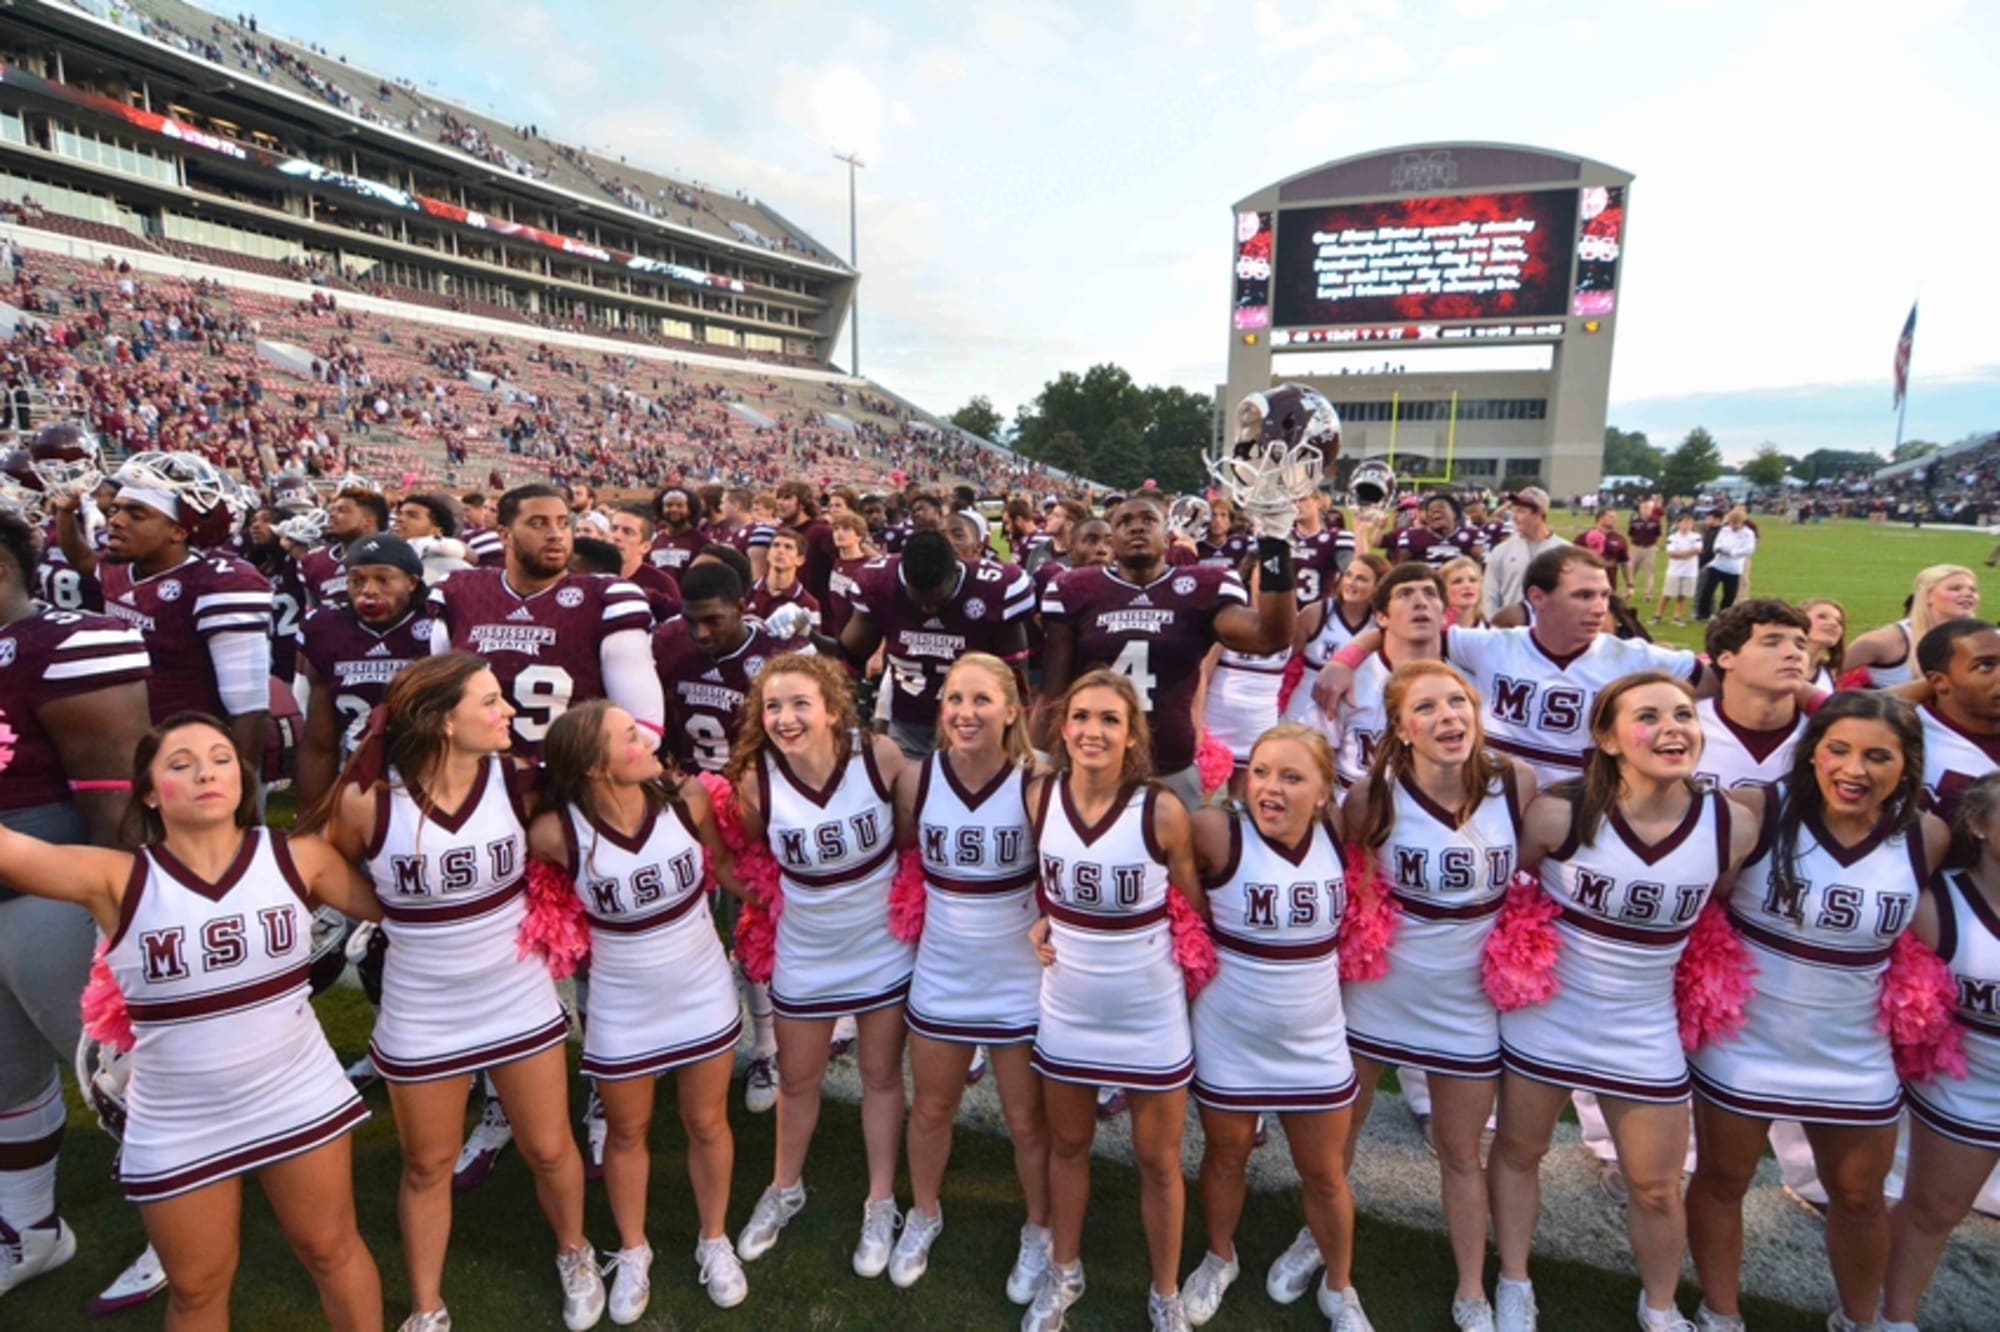 MSU Spring Game Chances of breaking attendance record?